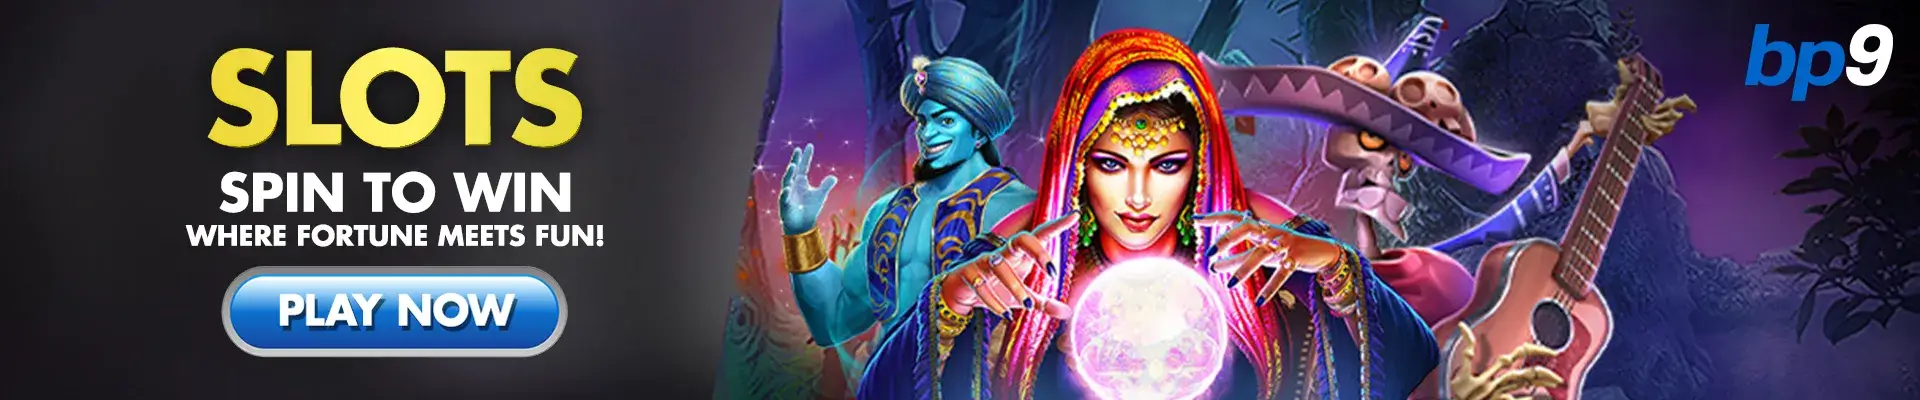 Slots Page Banner